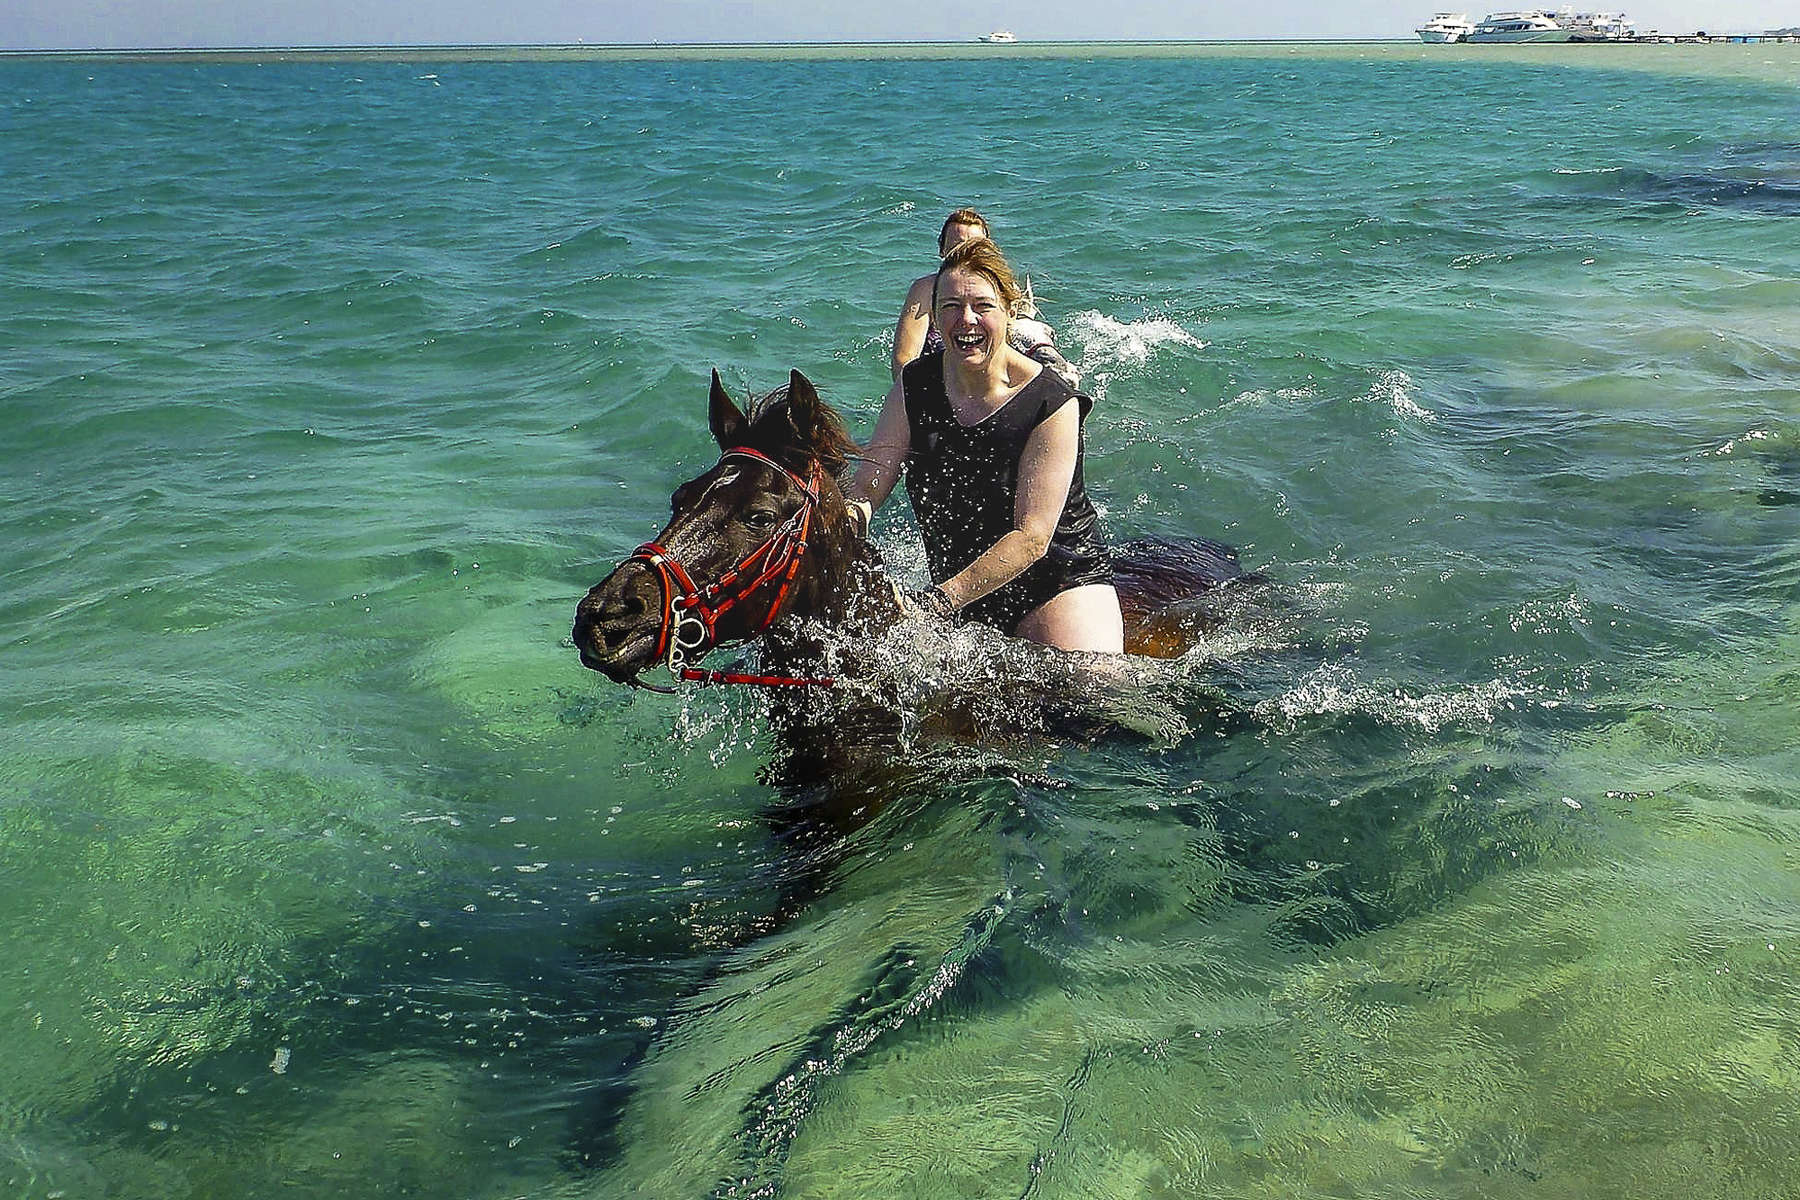 Rider swimming with her horse in Egypt